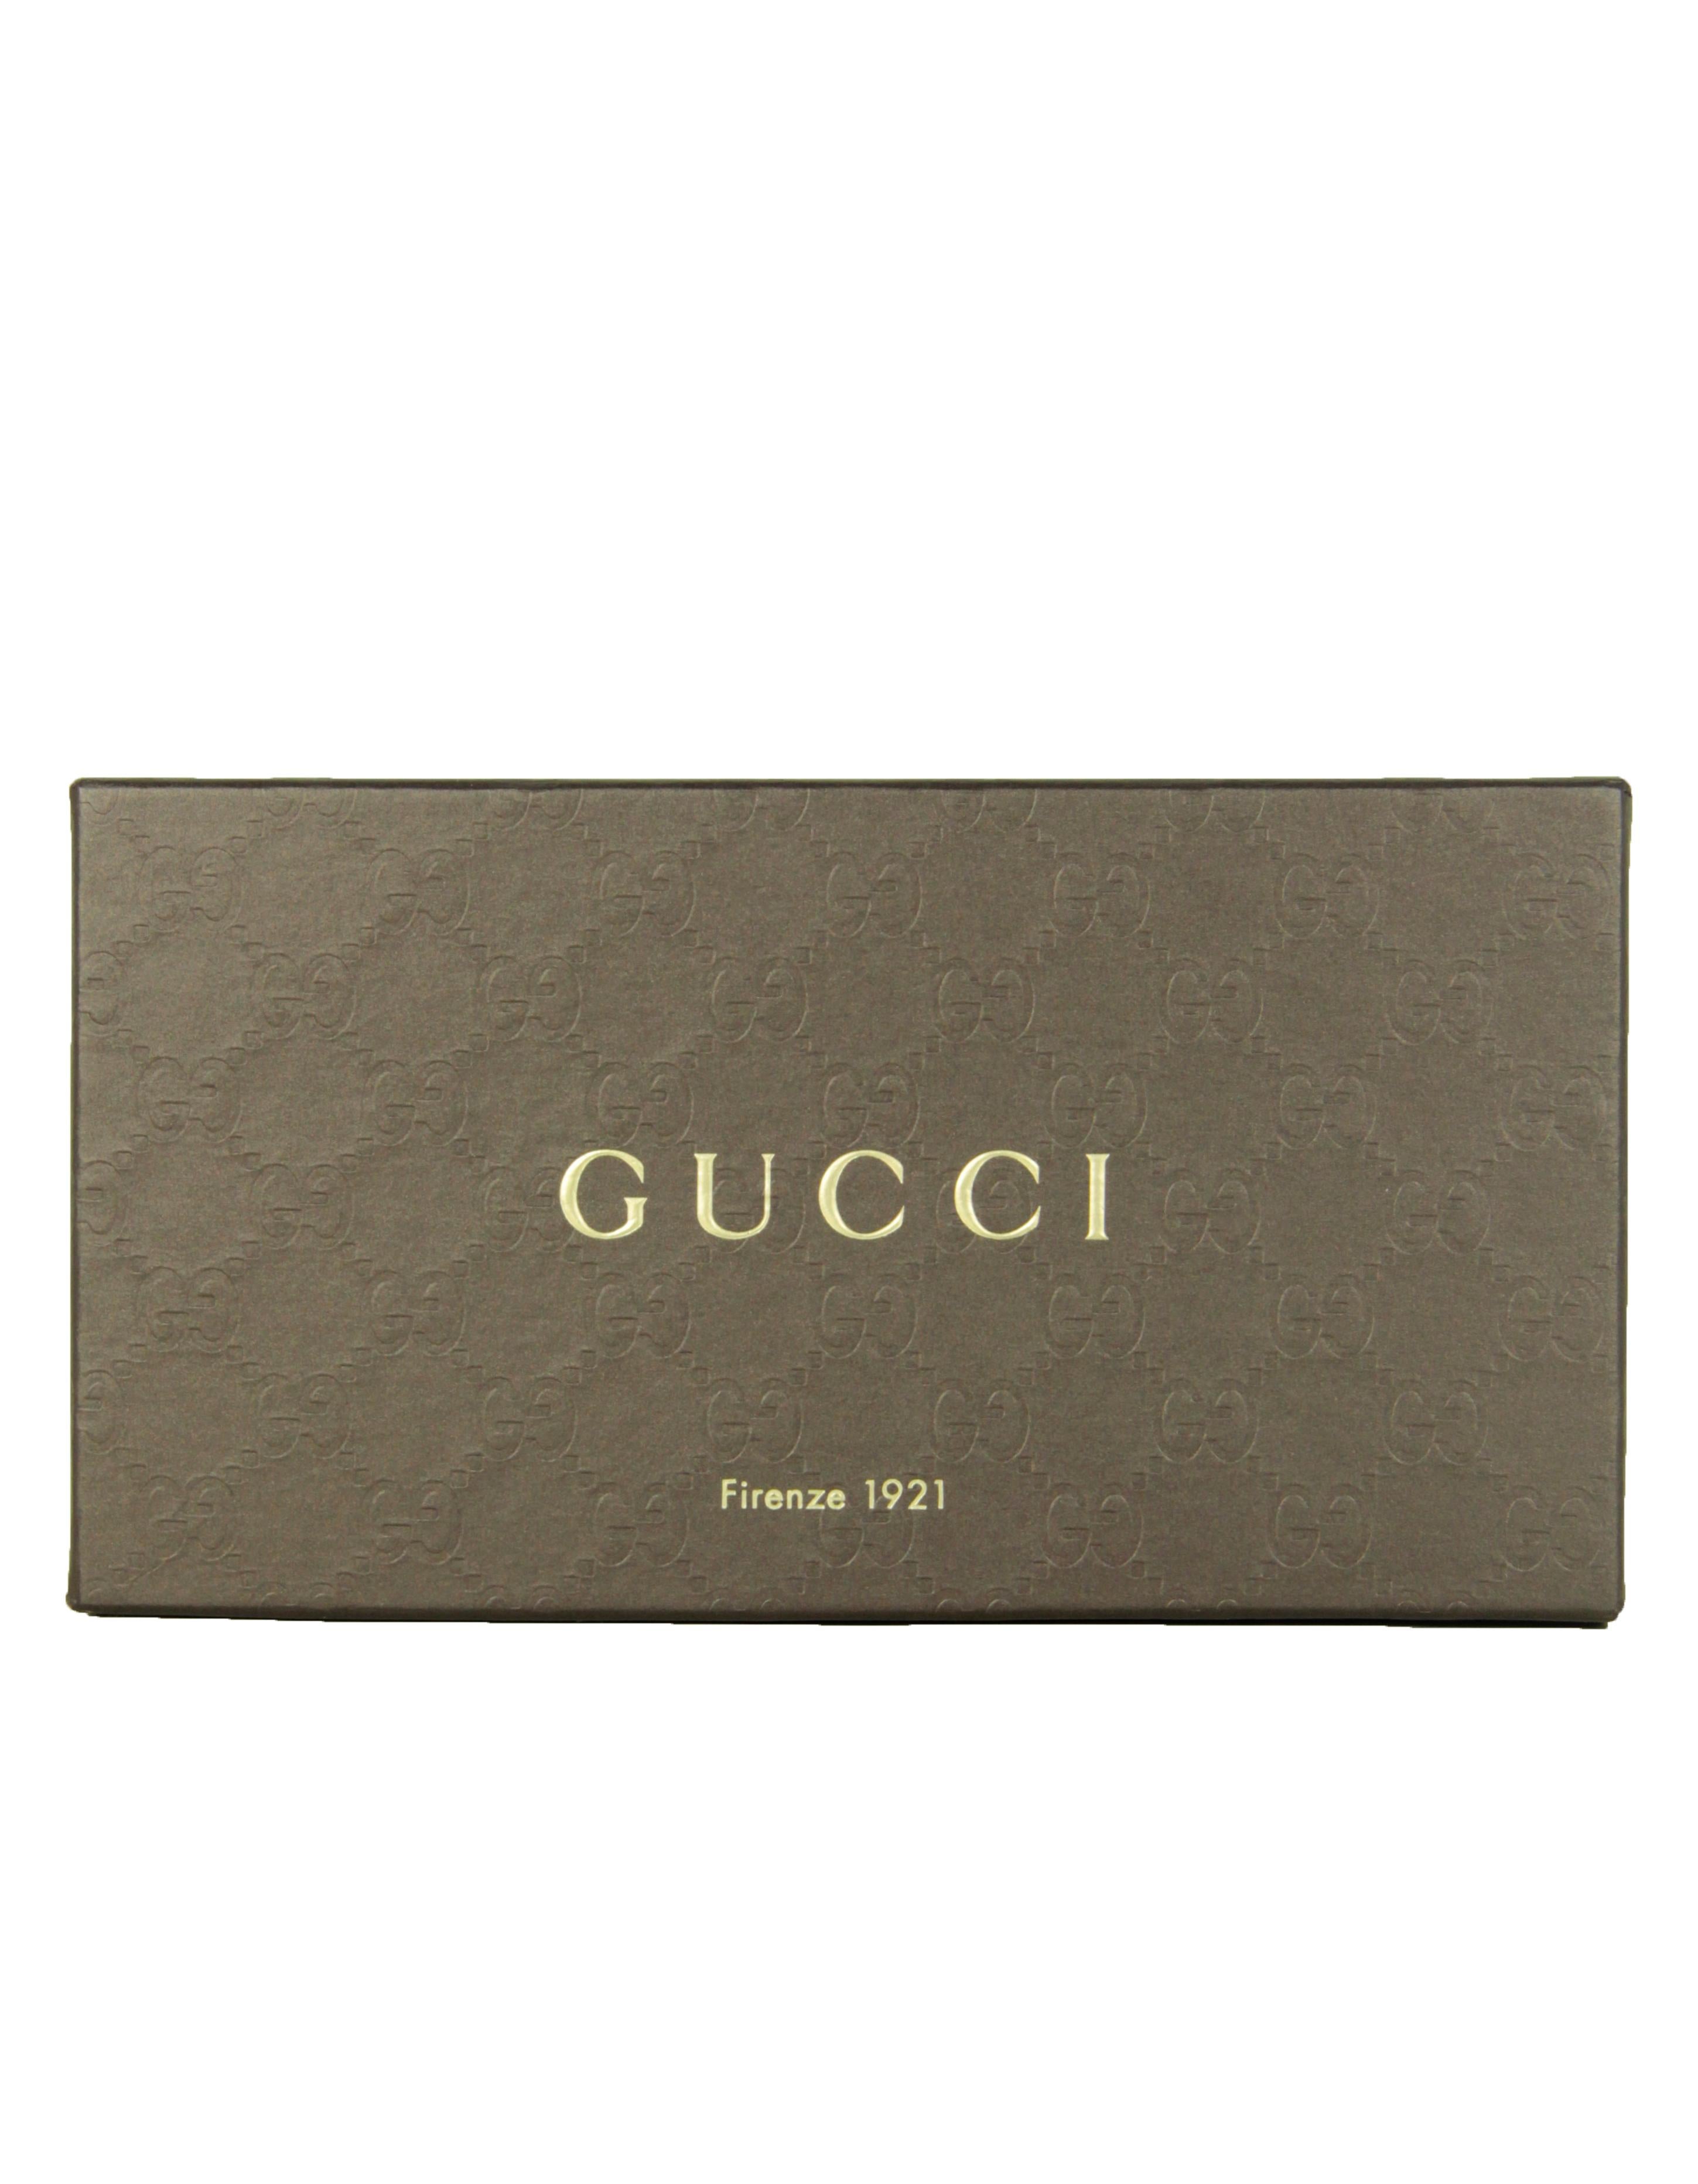 Gucci Red Leather Soho Zippy Logo Wallet 7